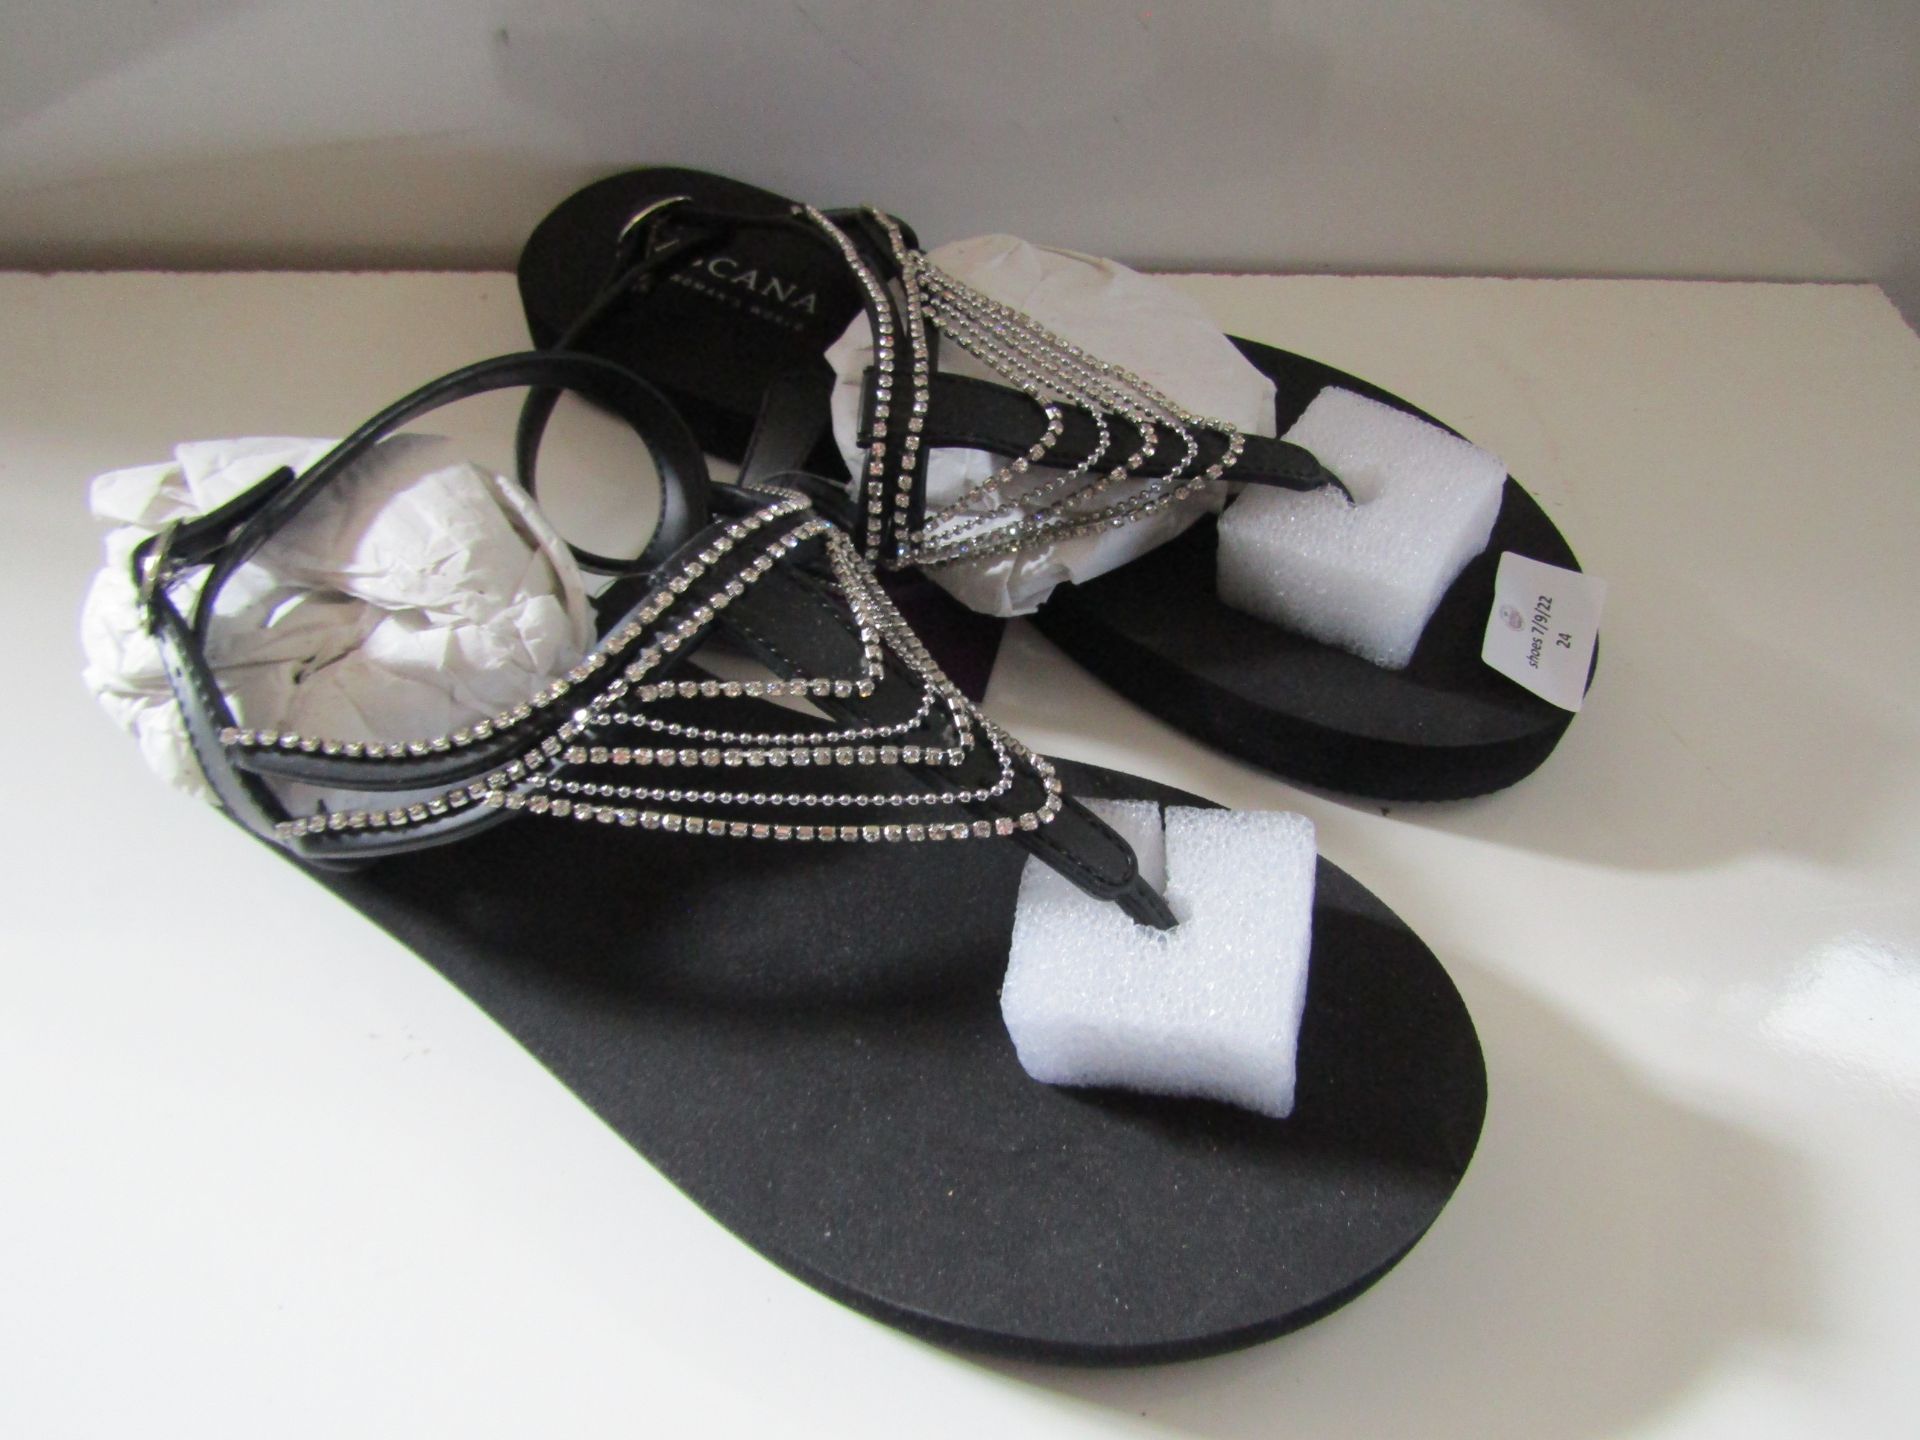 Lascana Flip Flop With Diamanti Design Black Size 40 New & Packaged